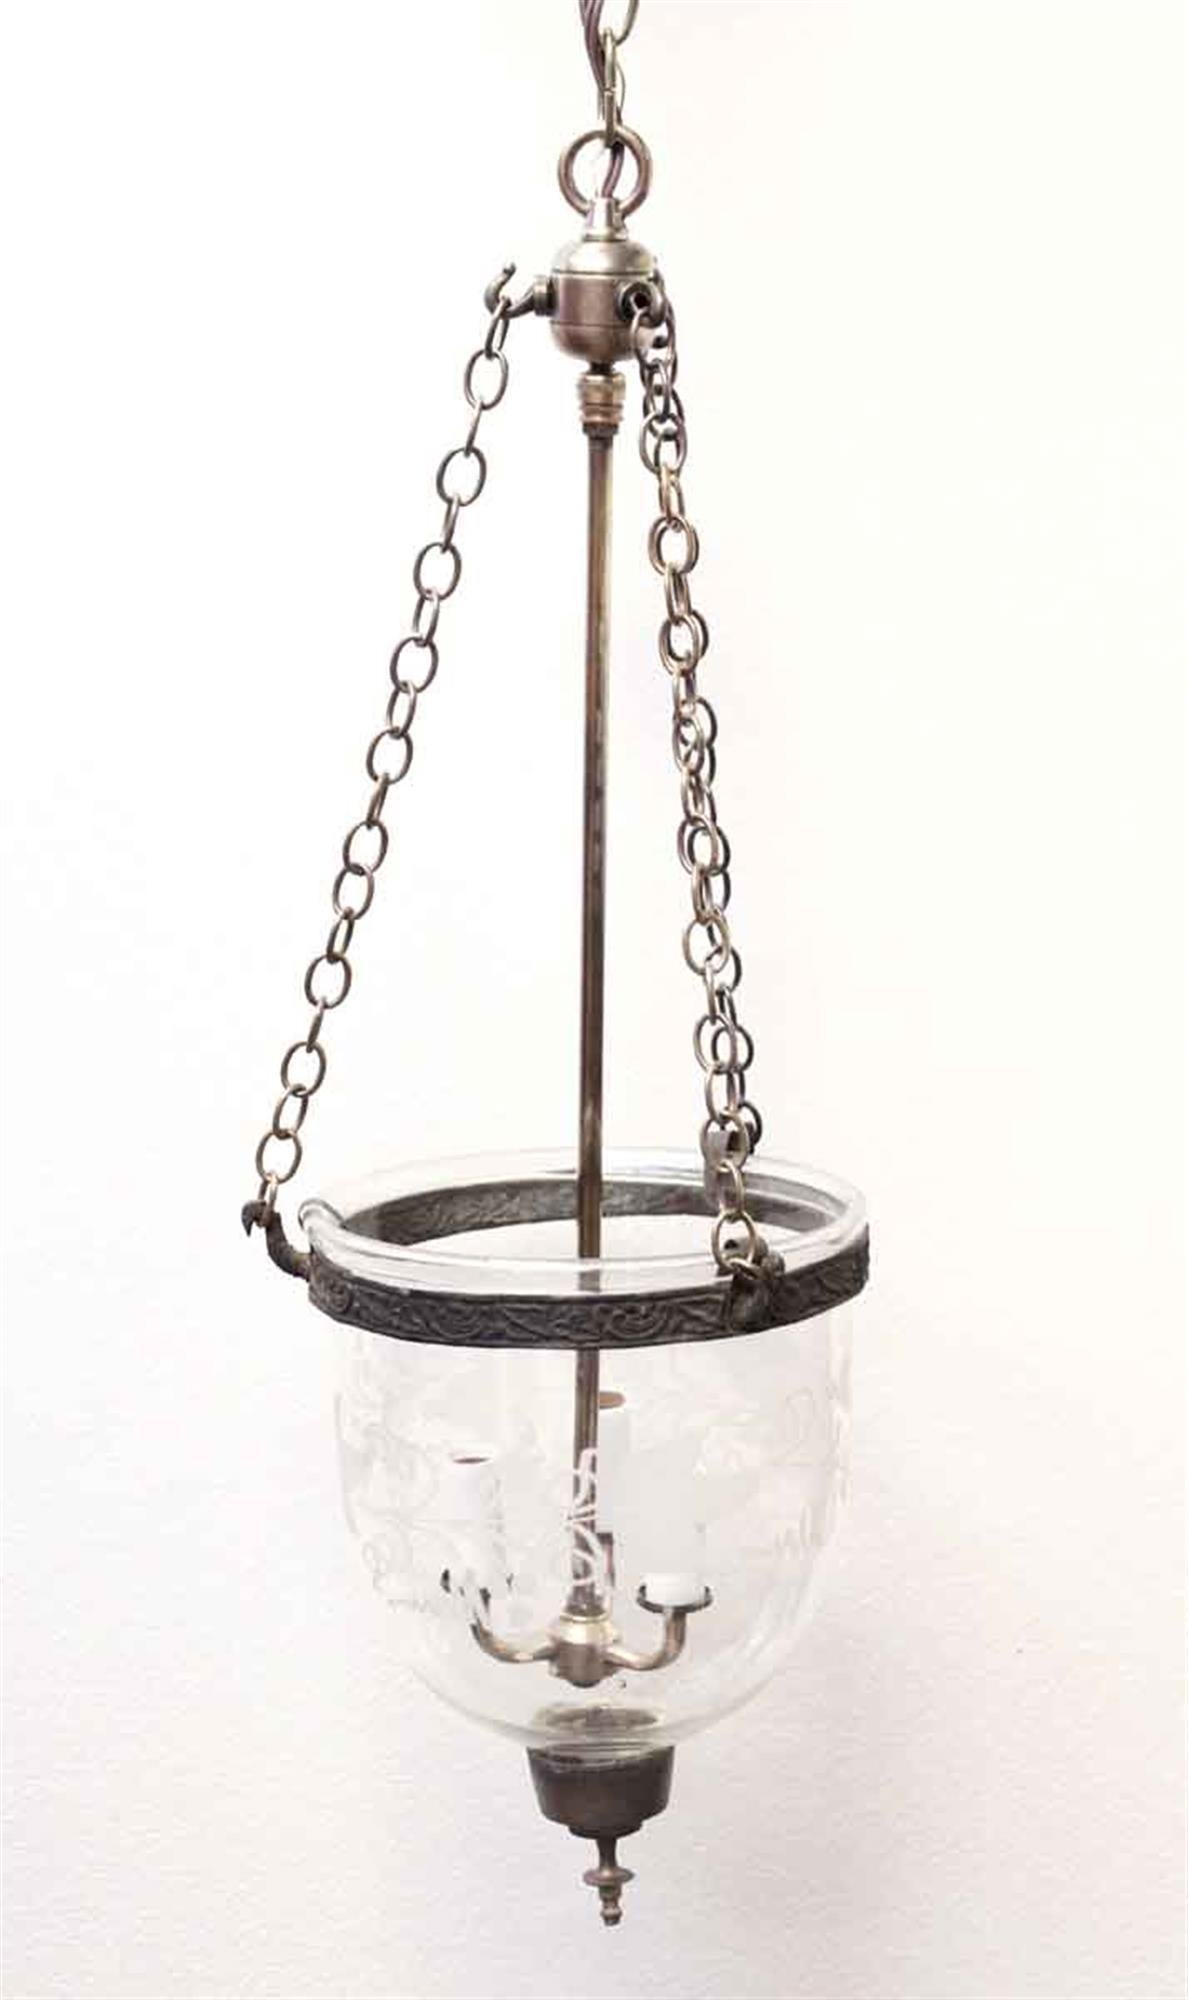 1940s hand blown crystal bell jar pendant light with fine decorative etching and three candlestick lights. This light has been completely restored with new wiring and brass hardware. The globe, trim and finial are all original. This can be viewed at